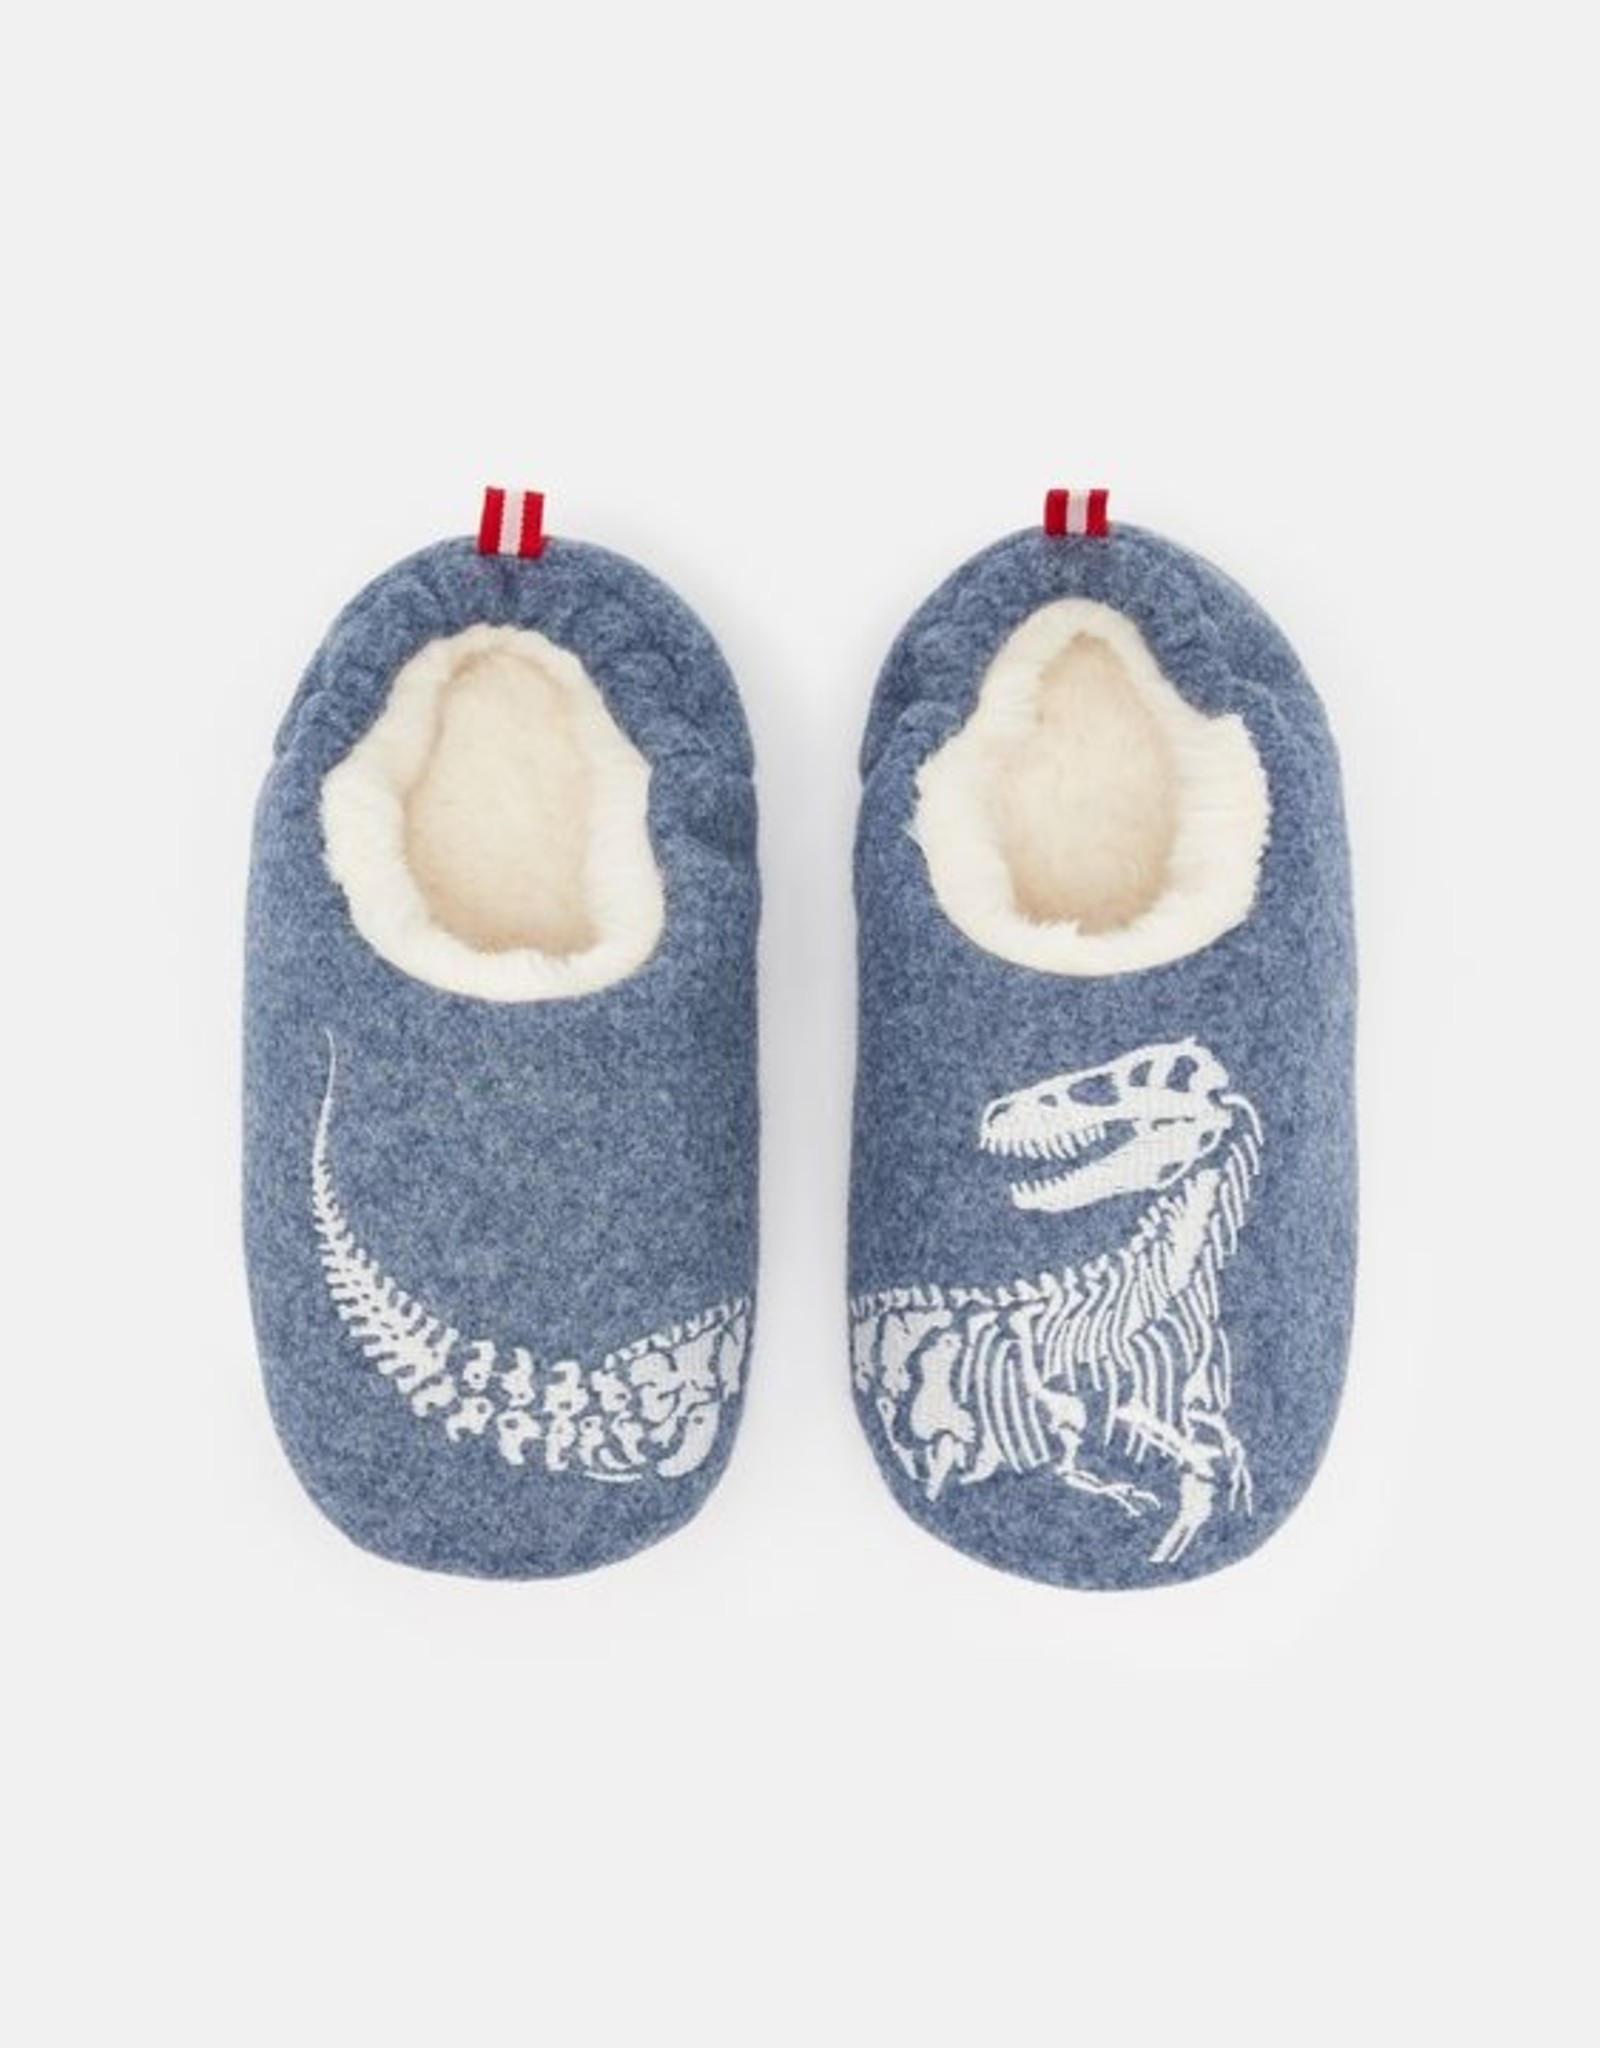 Joules FA21 Slippers - Assorted